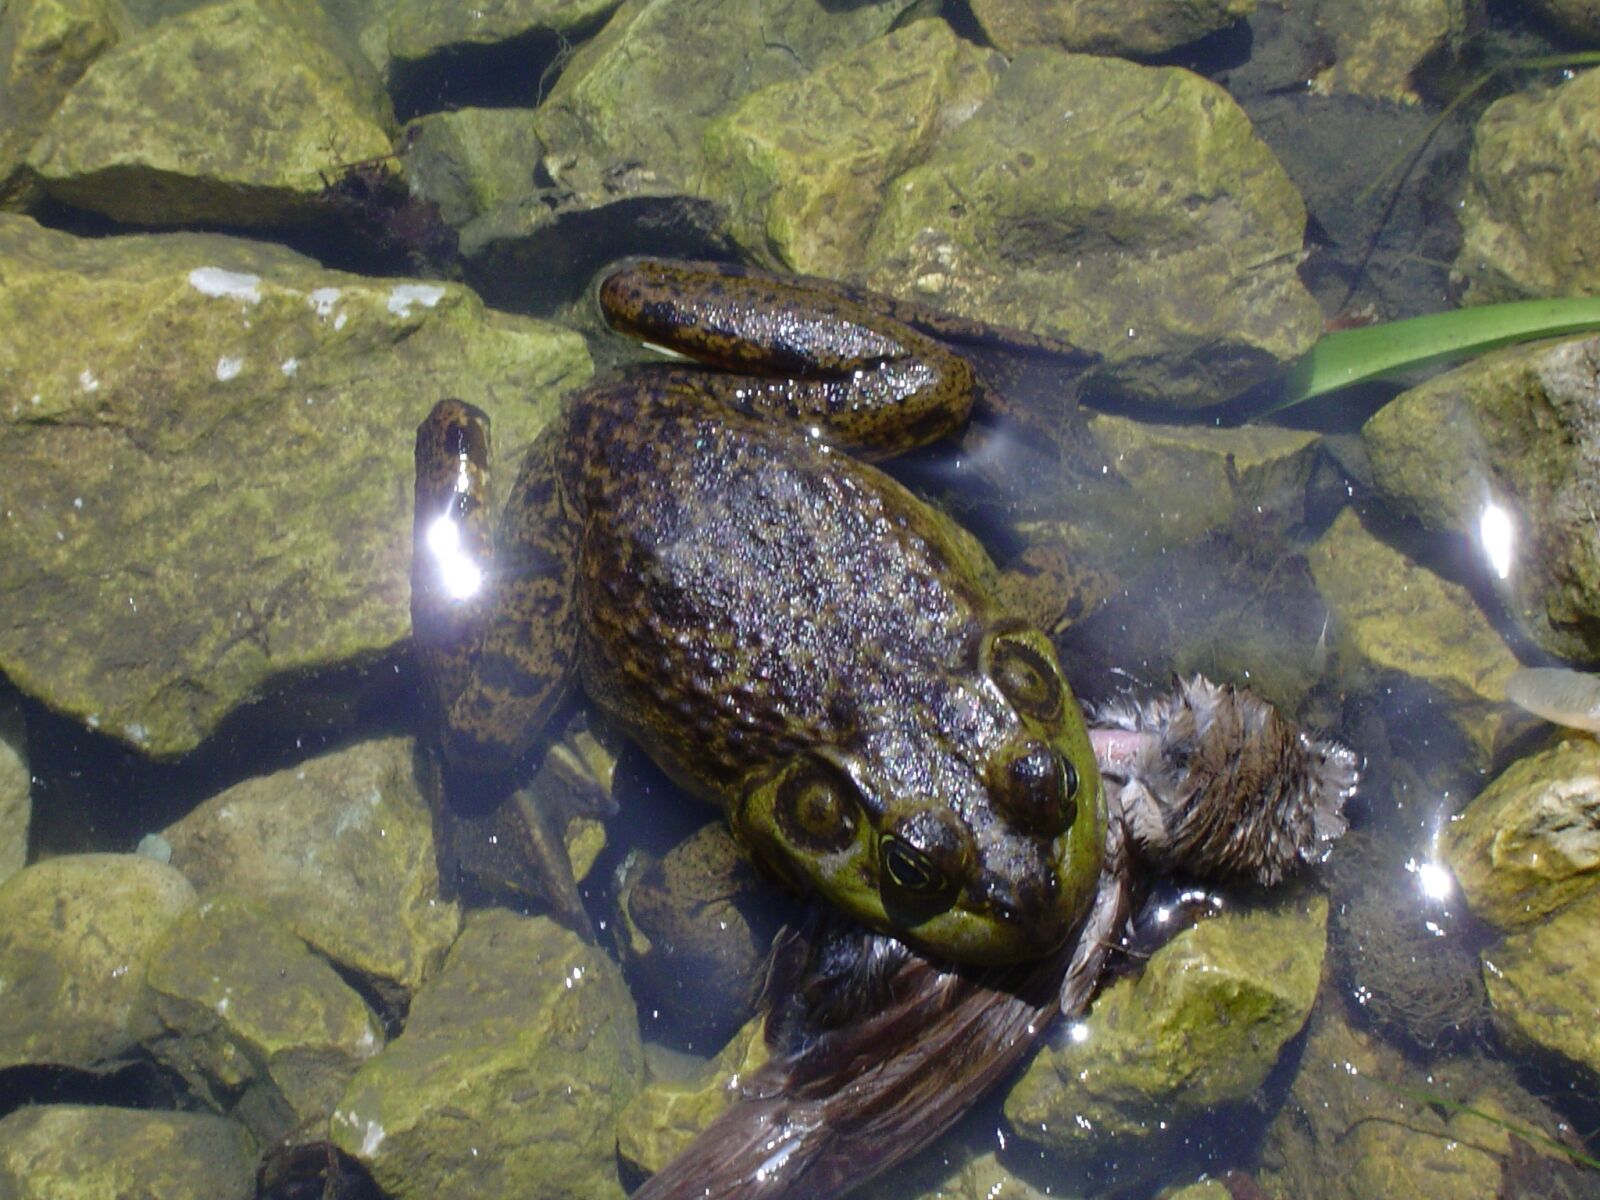 Sony DSC-P72 sample photo. Frog, pond, water photography